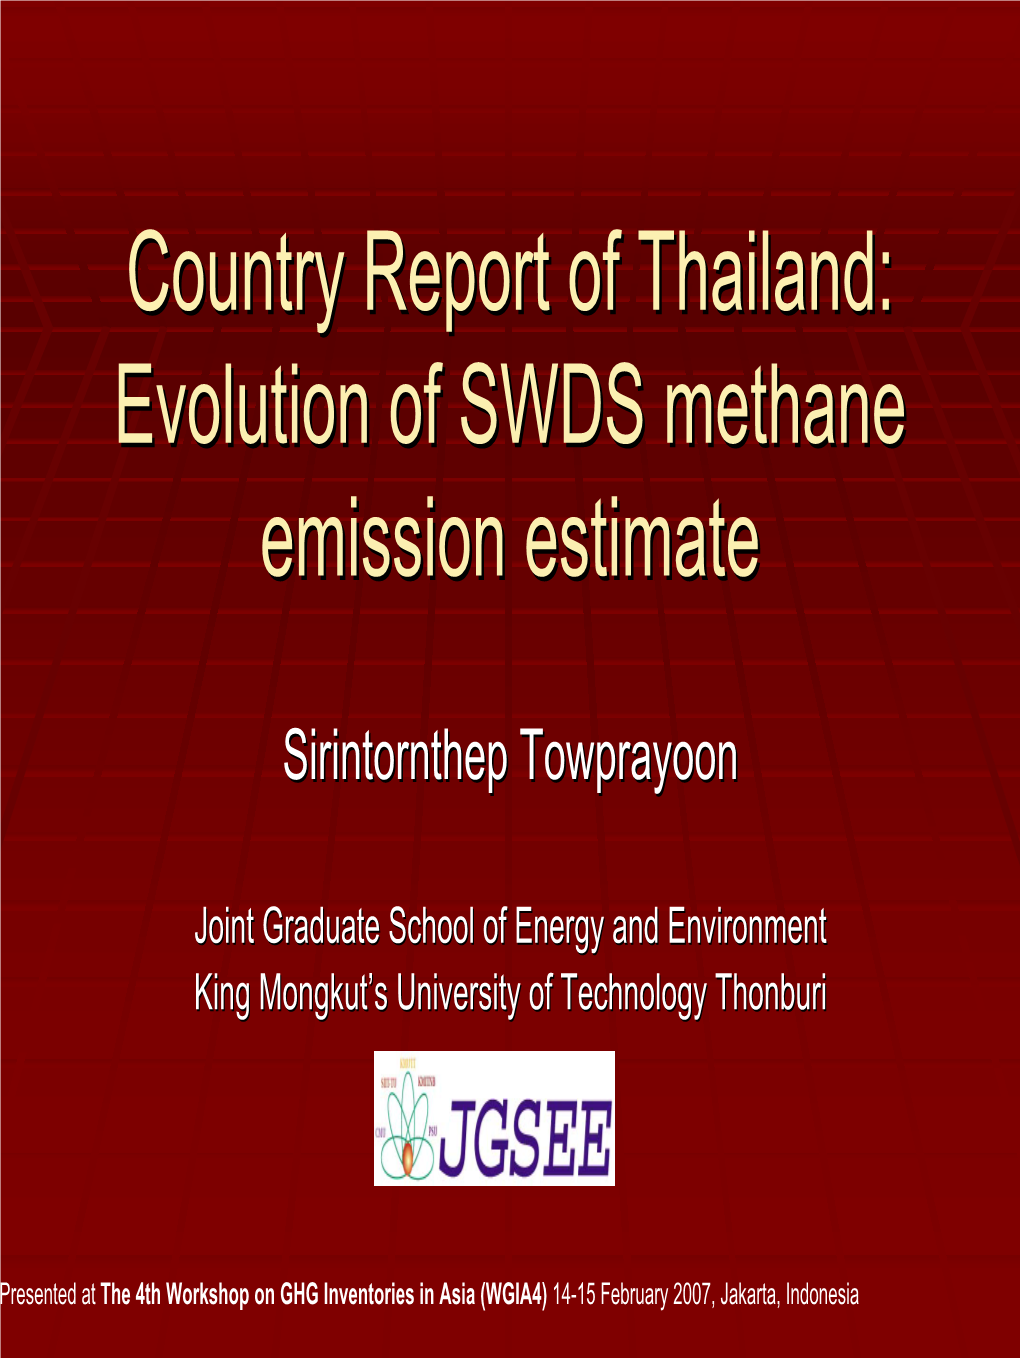 Country Report of Thailand: Recent Study Results on Methane Emission Estimate